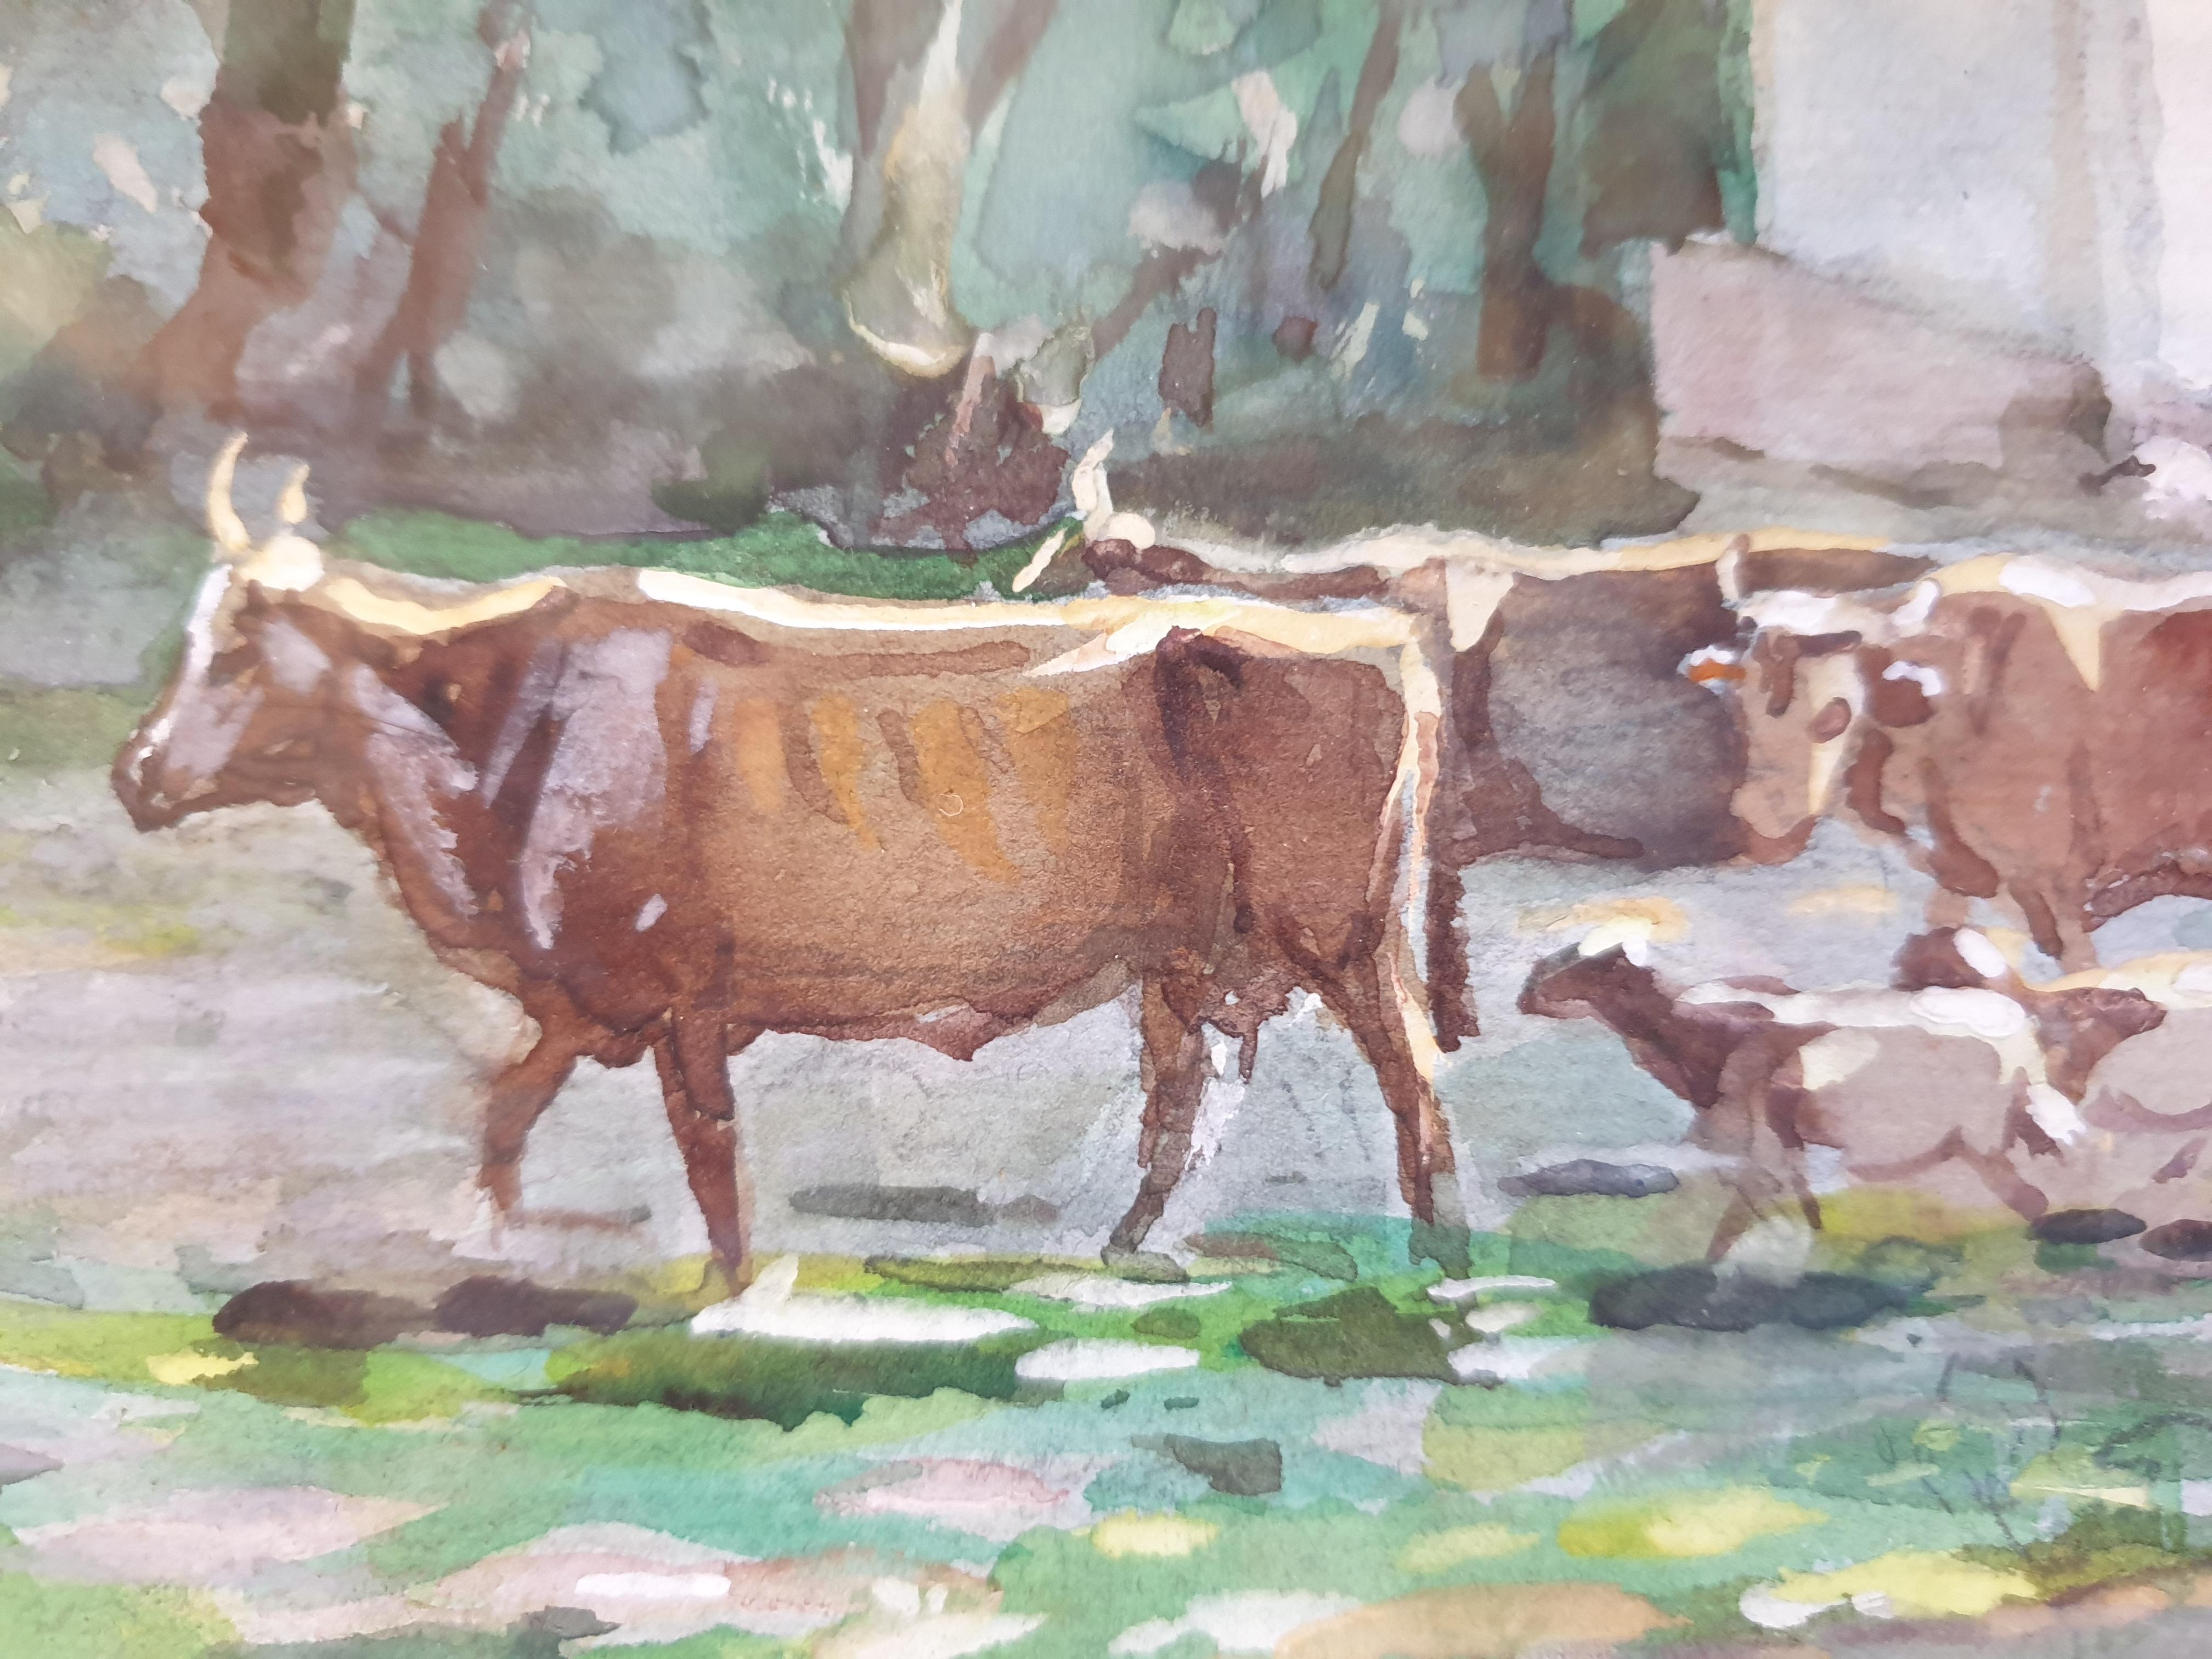 Cattle, Goats and Sheep Grazing, Orientalist Watercolour. - Brown Landscape Art by Aiveill